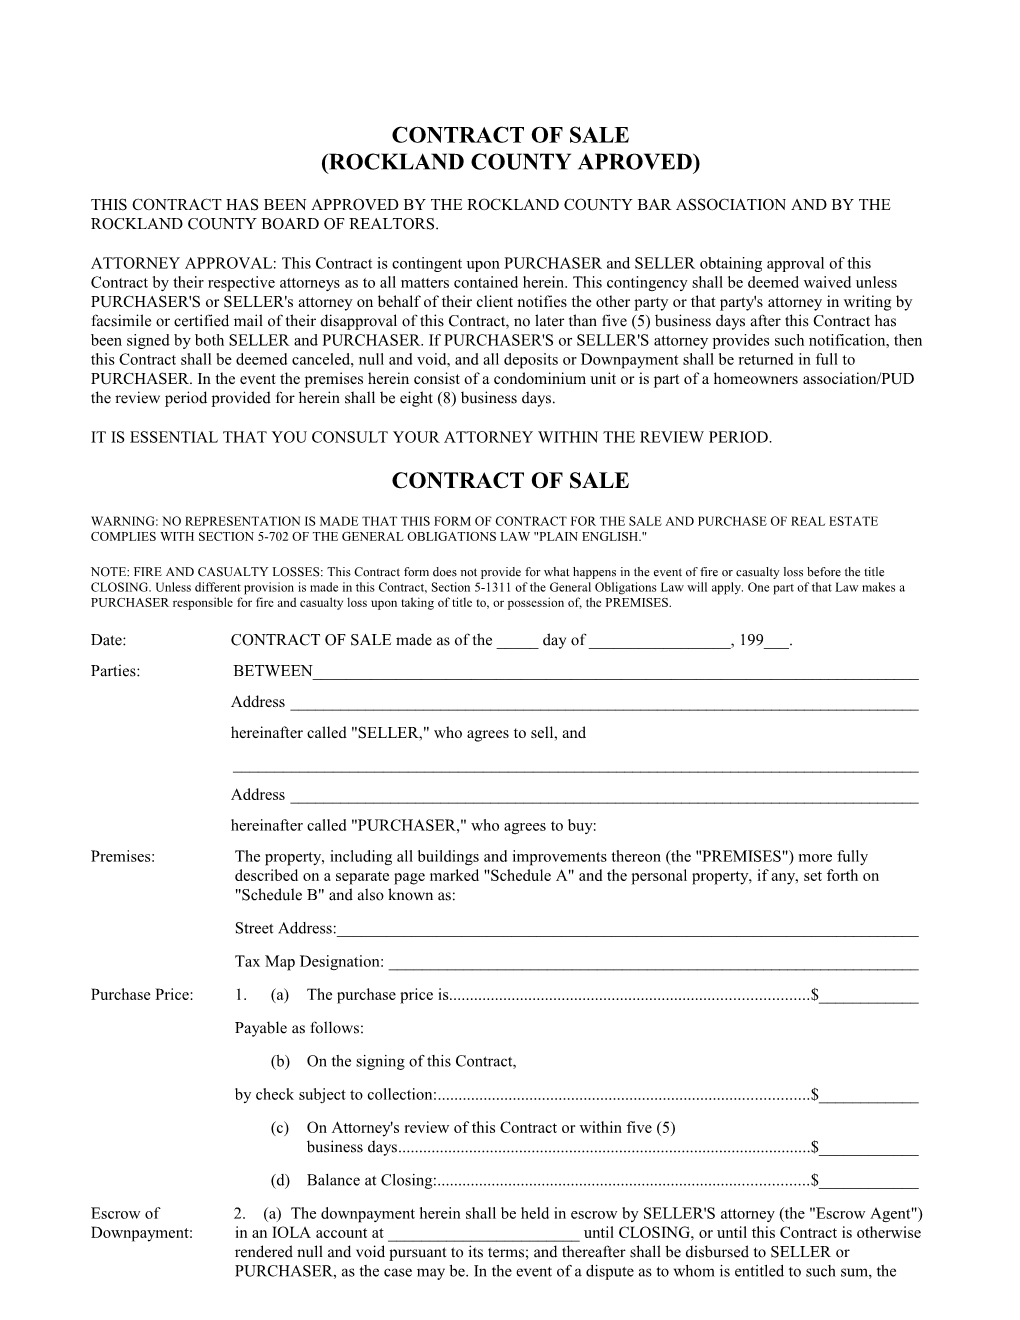 Contract of Sale(Rockland County Aproved)